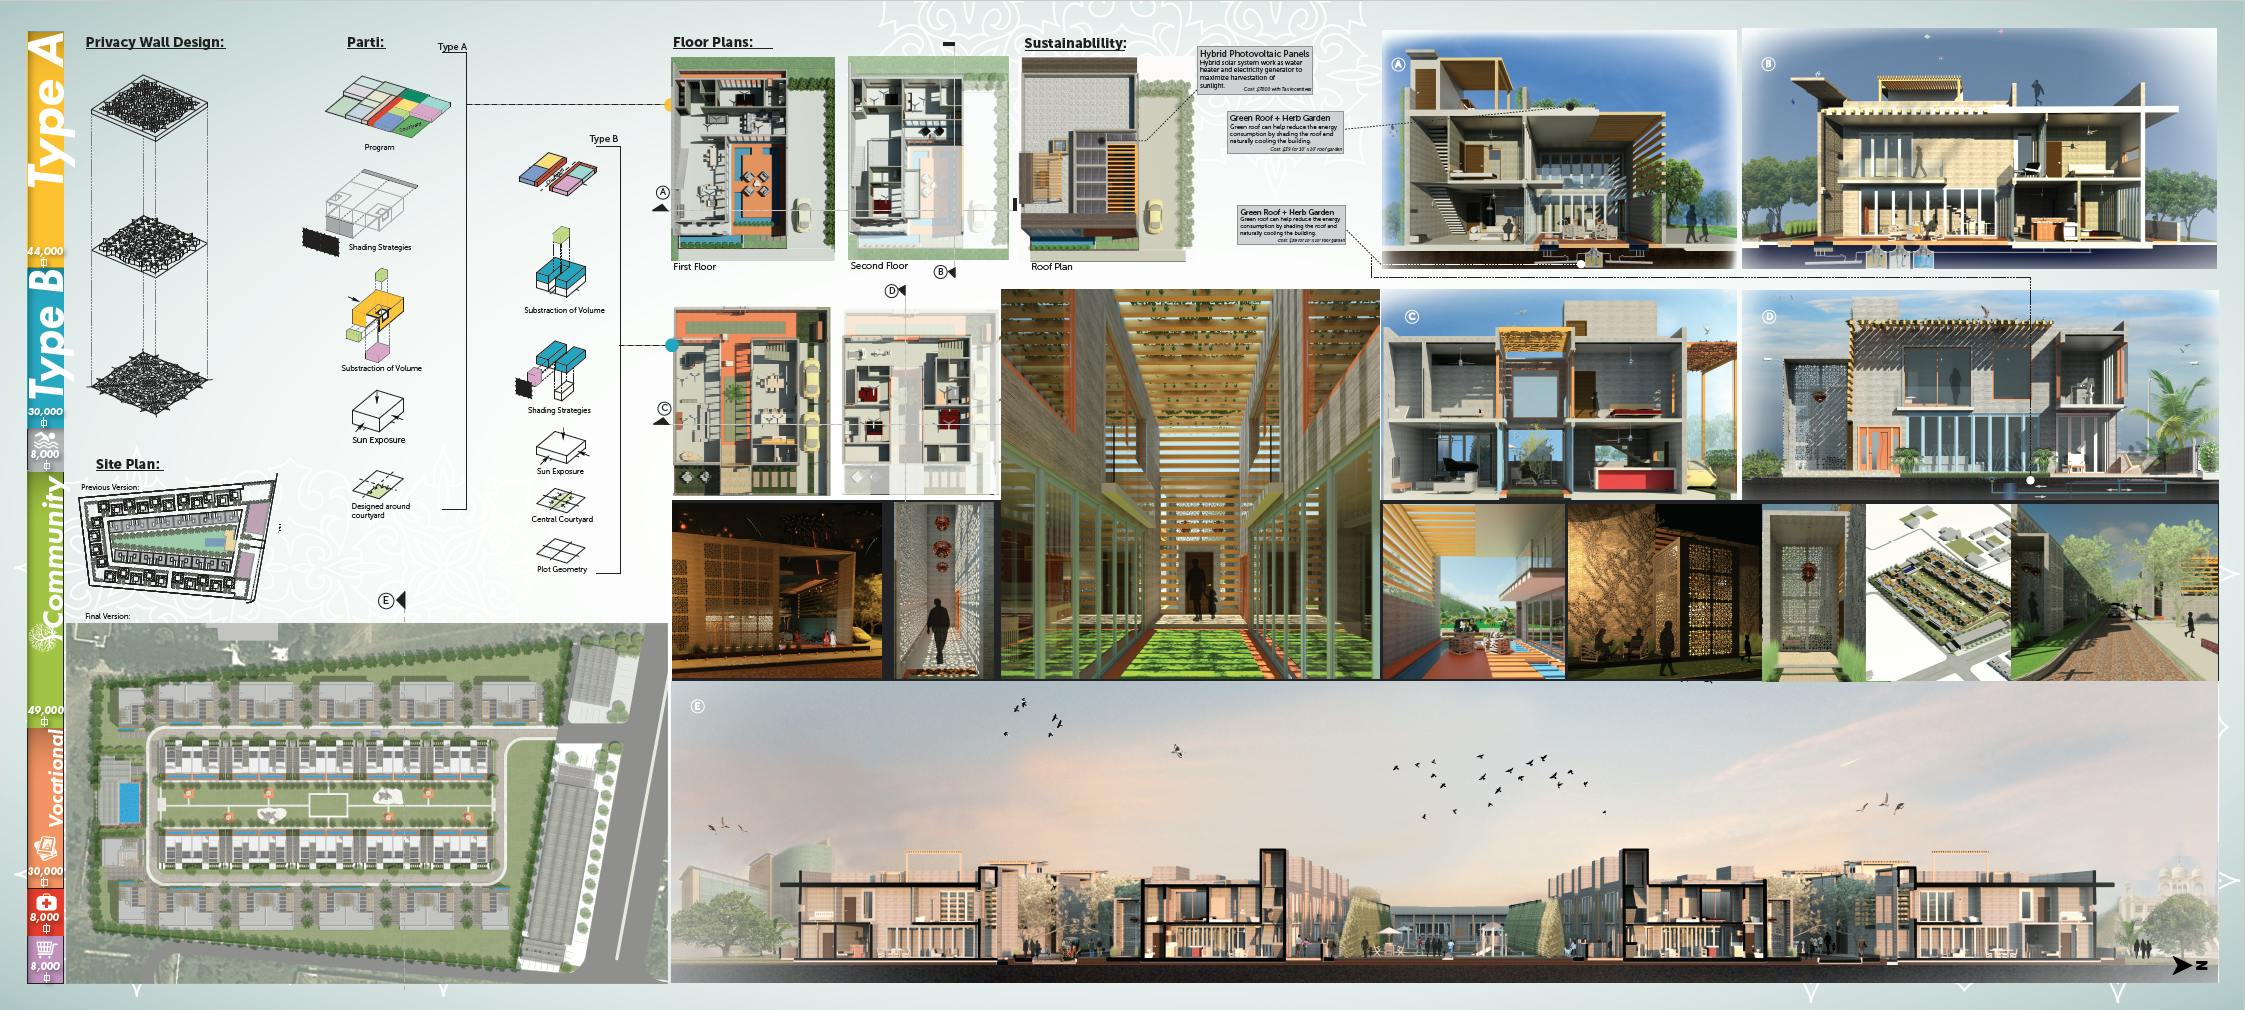 Sangaath Housing - M. Arch Thesis Project | Harshil ...